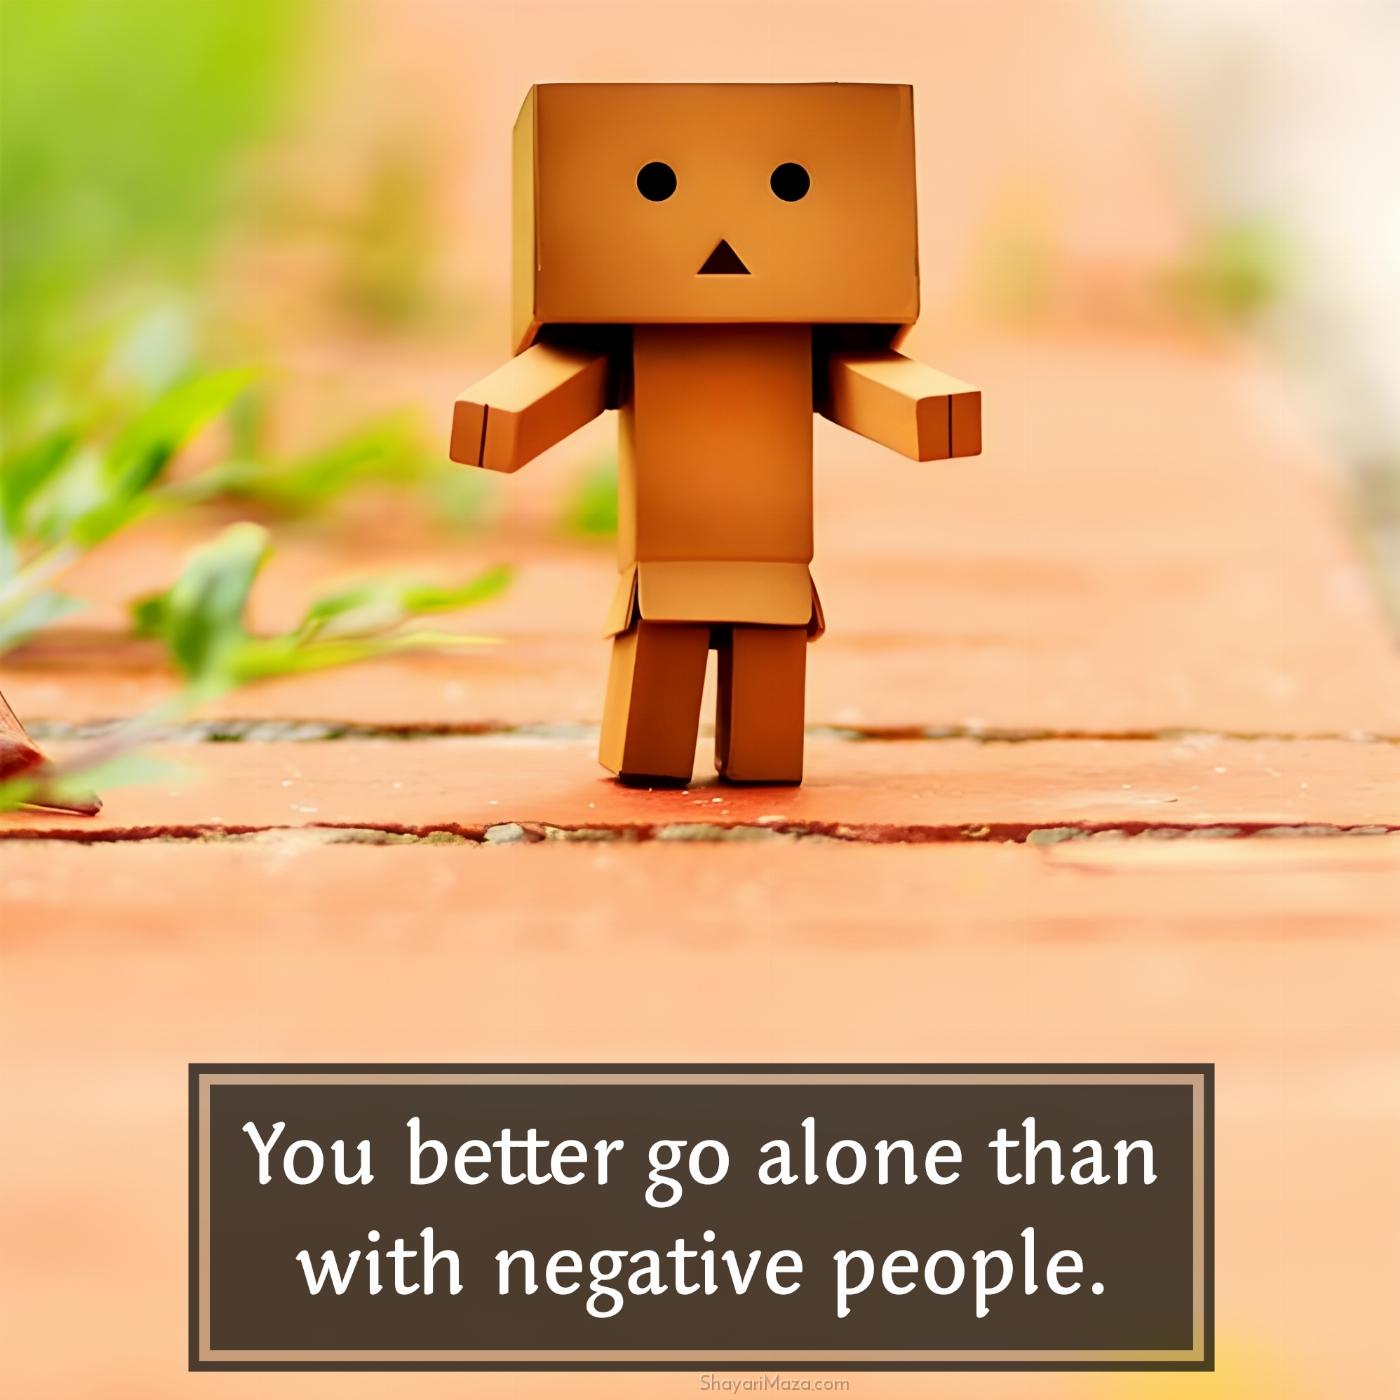 You better go alone than with negative people